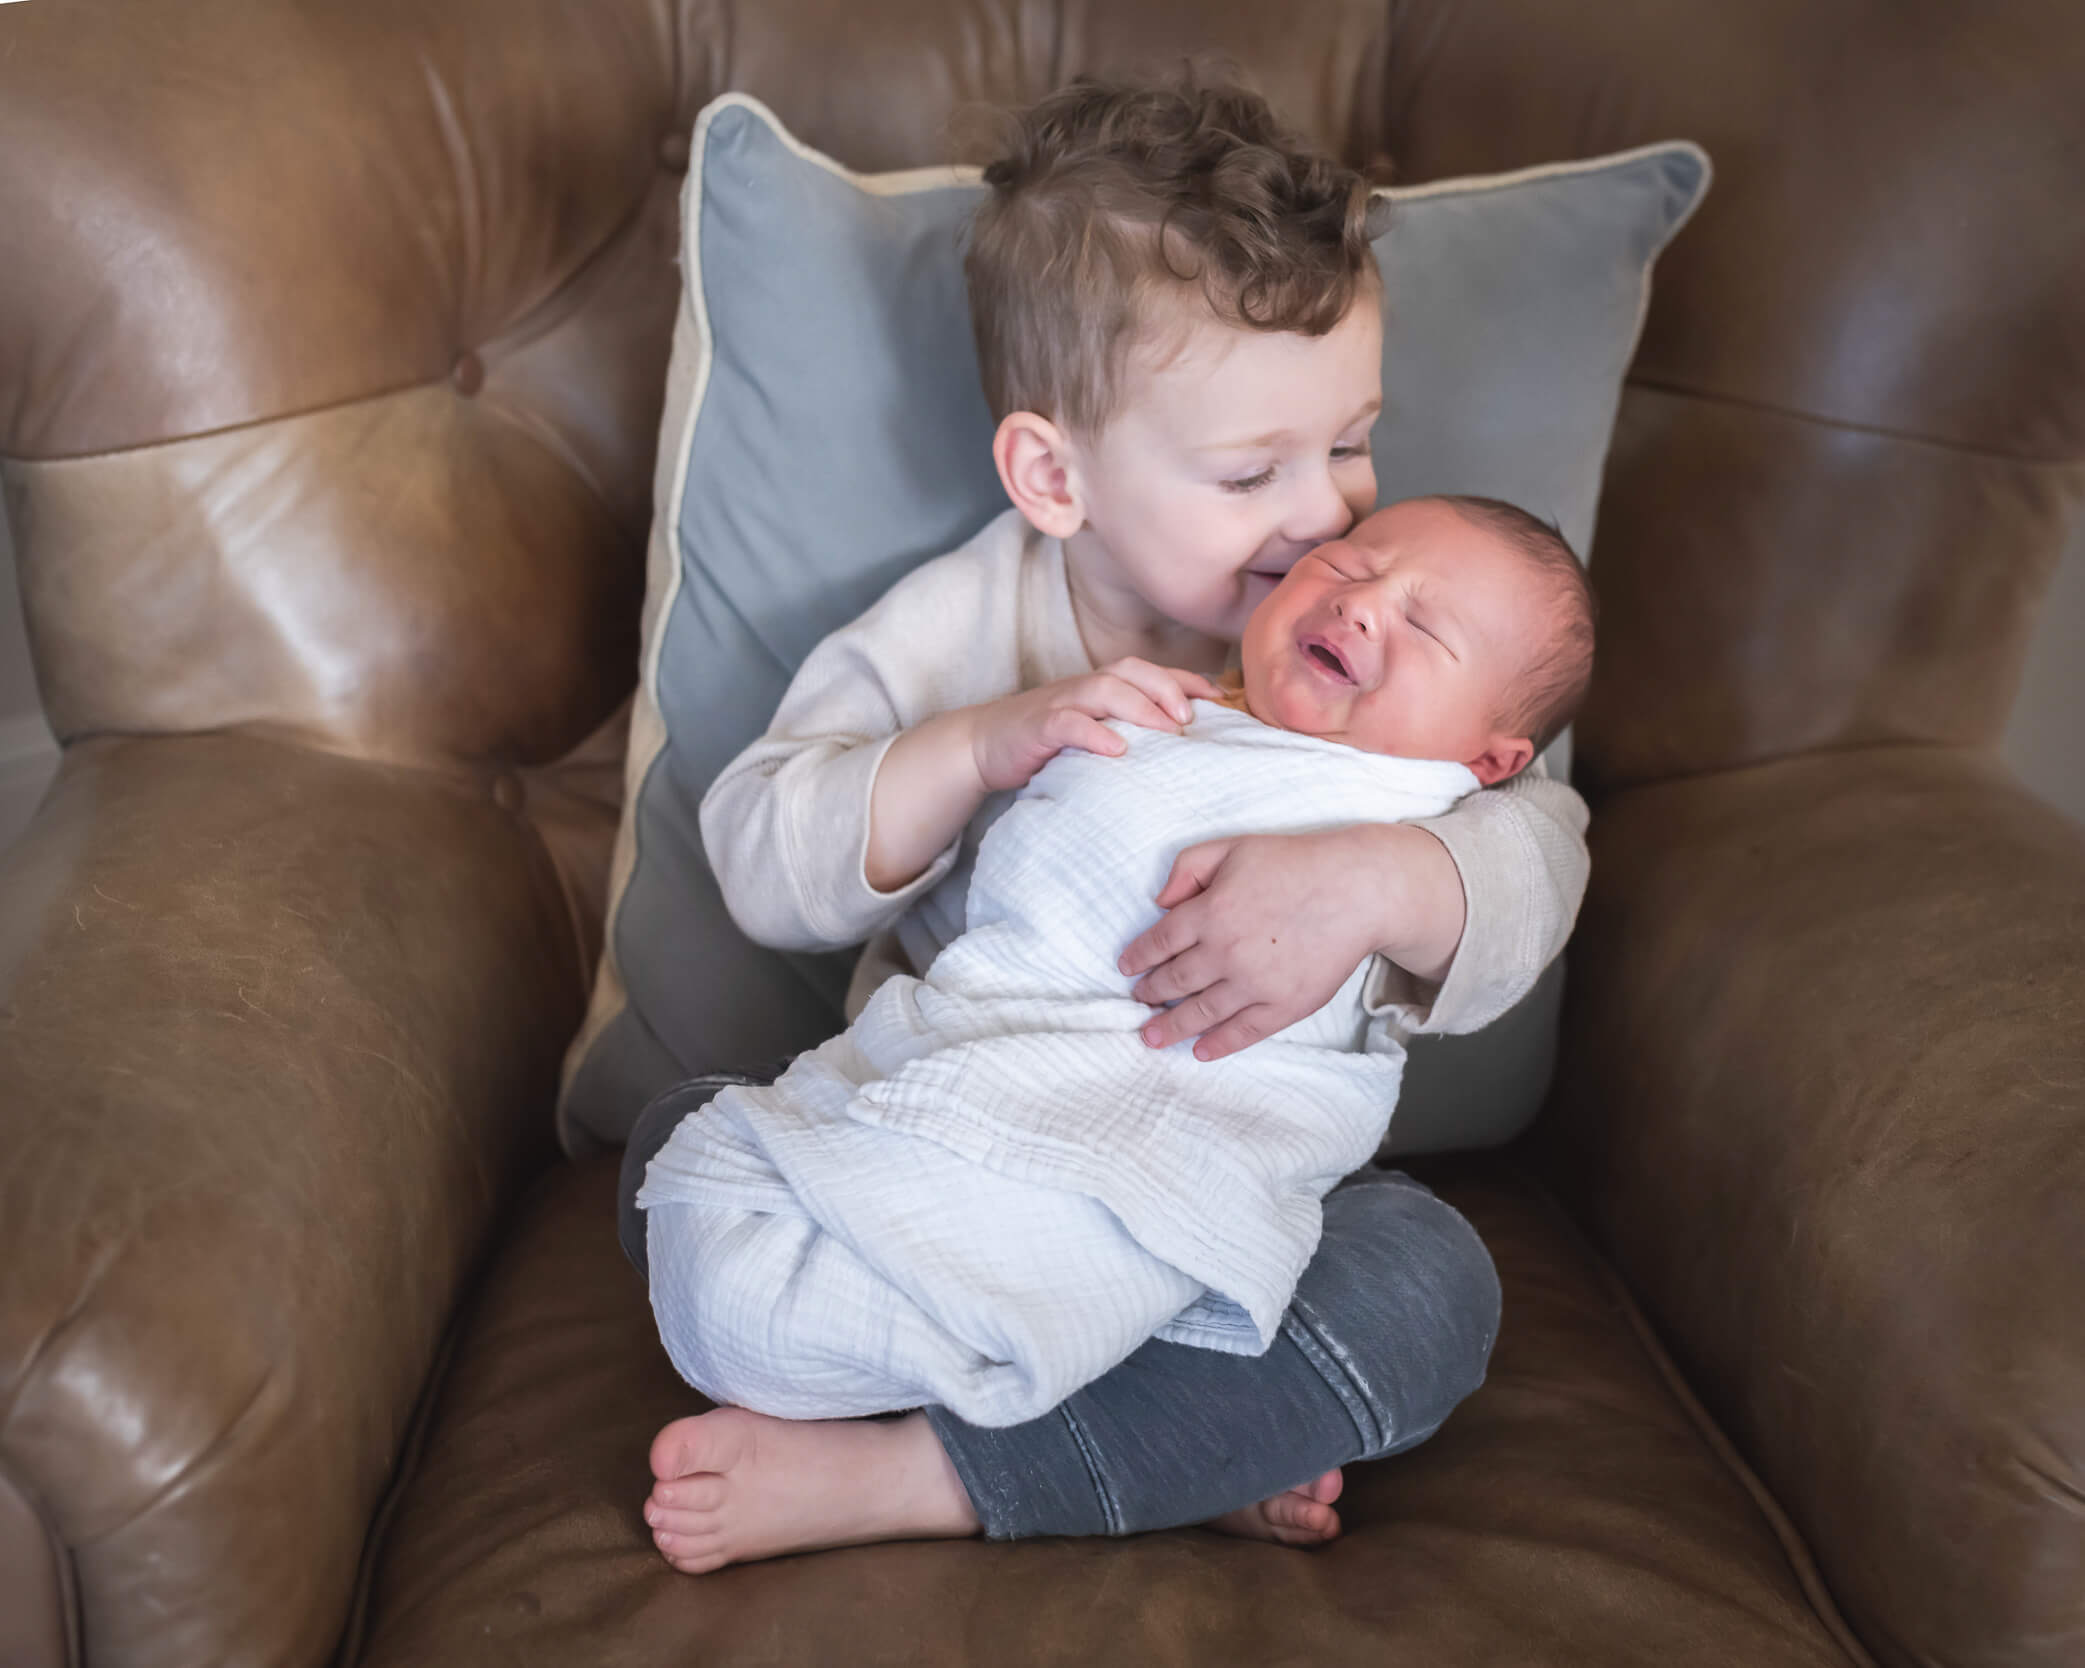 littlest brother holding and kissing his new baby sibling in a comfy leather chair